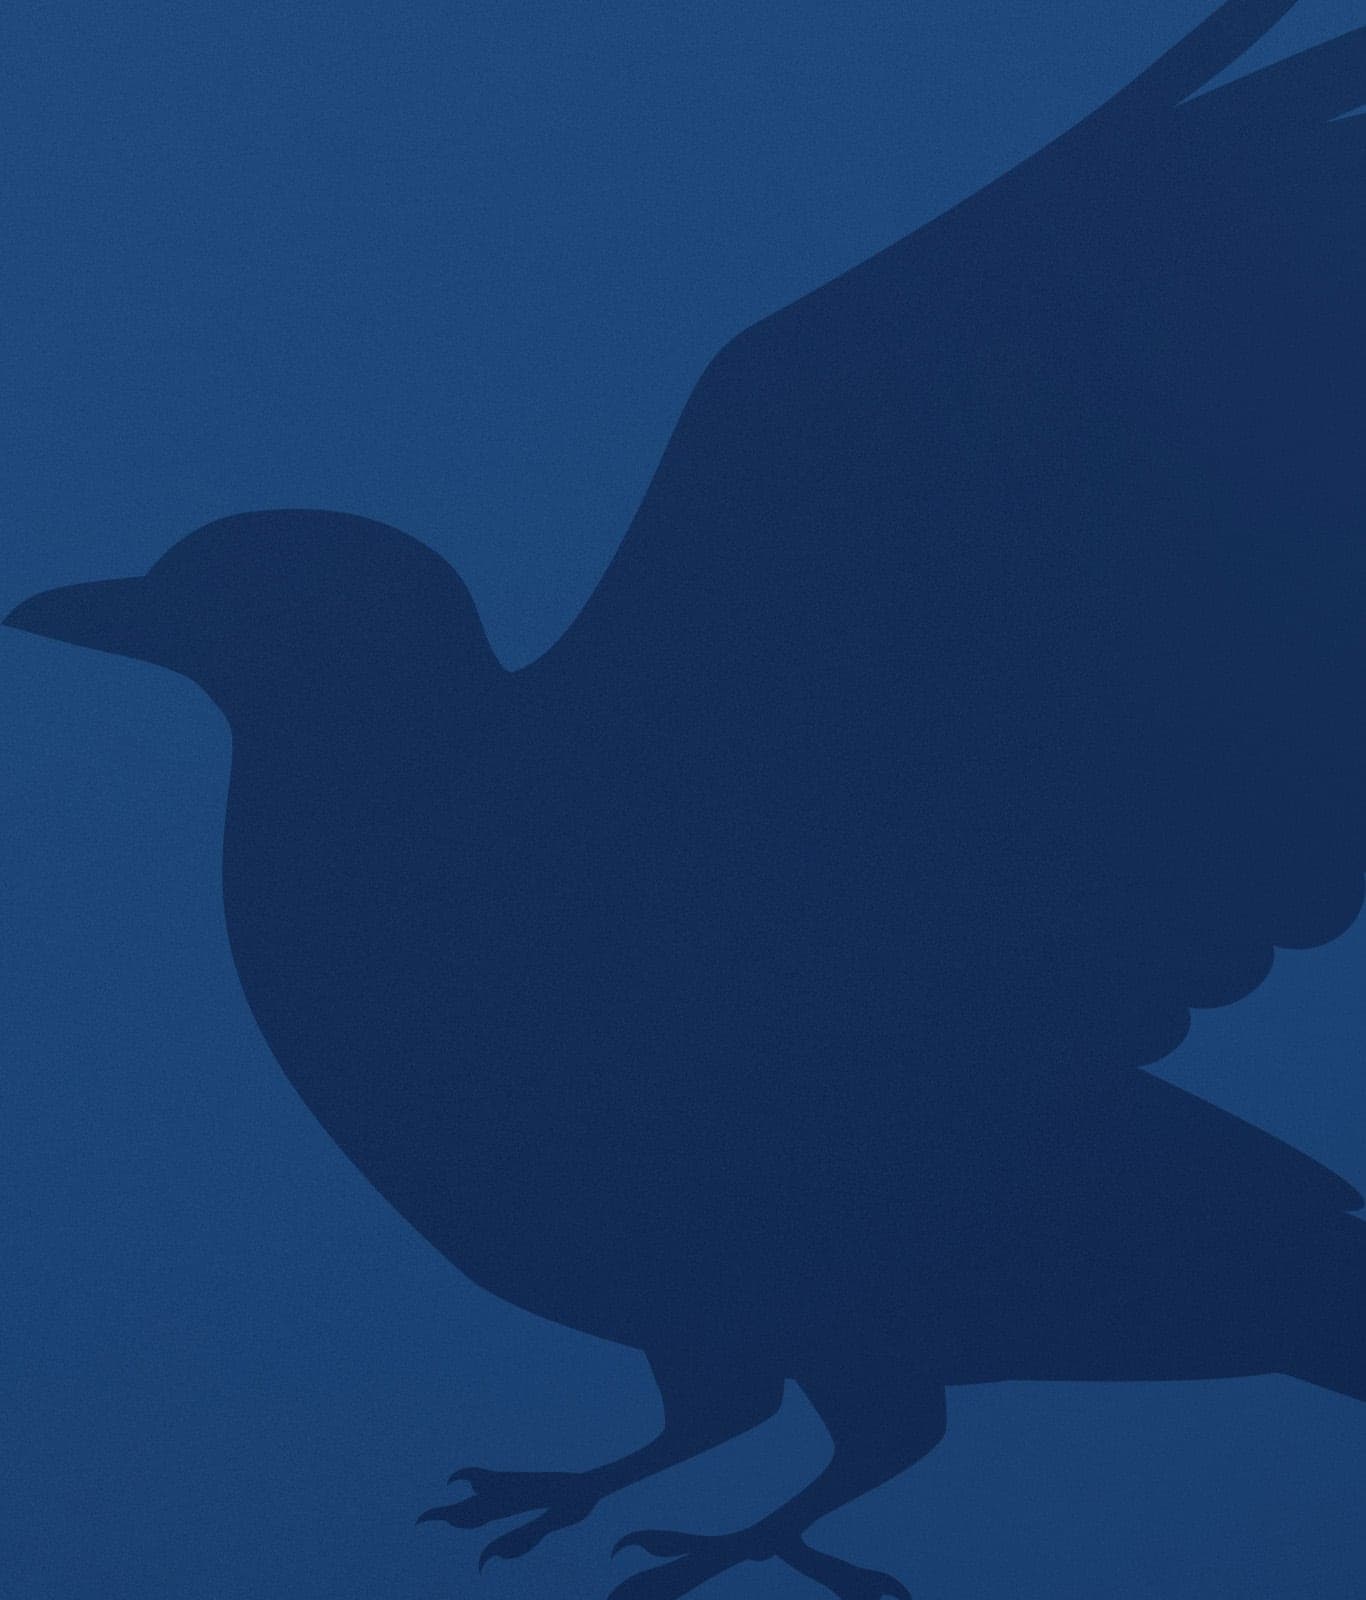 Ravenclaw raven on a blue background.